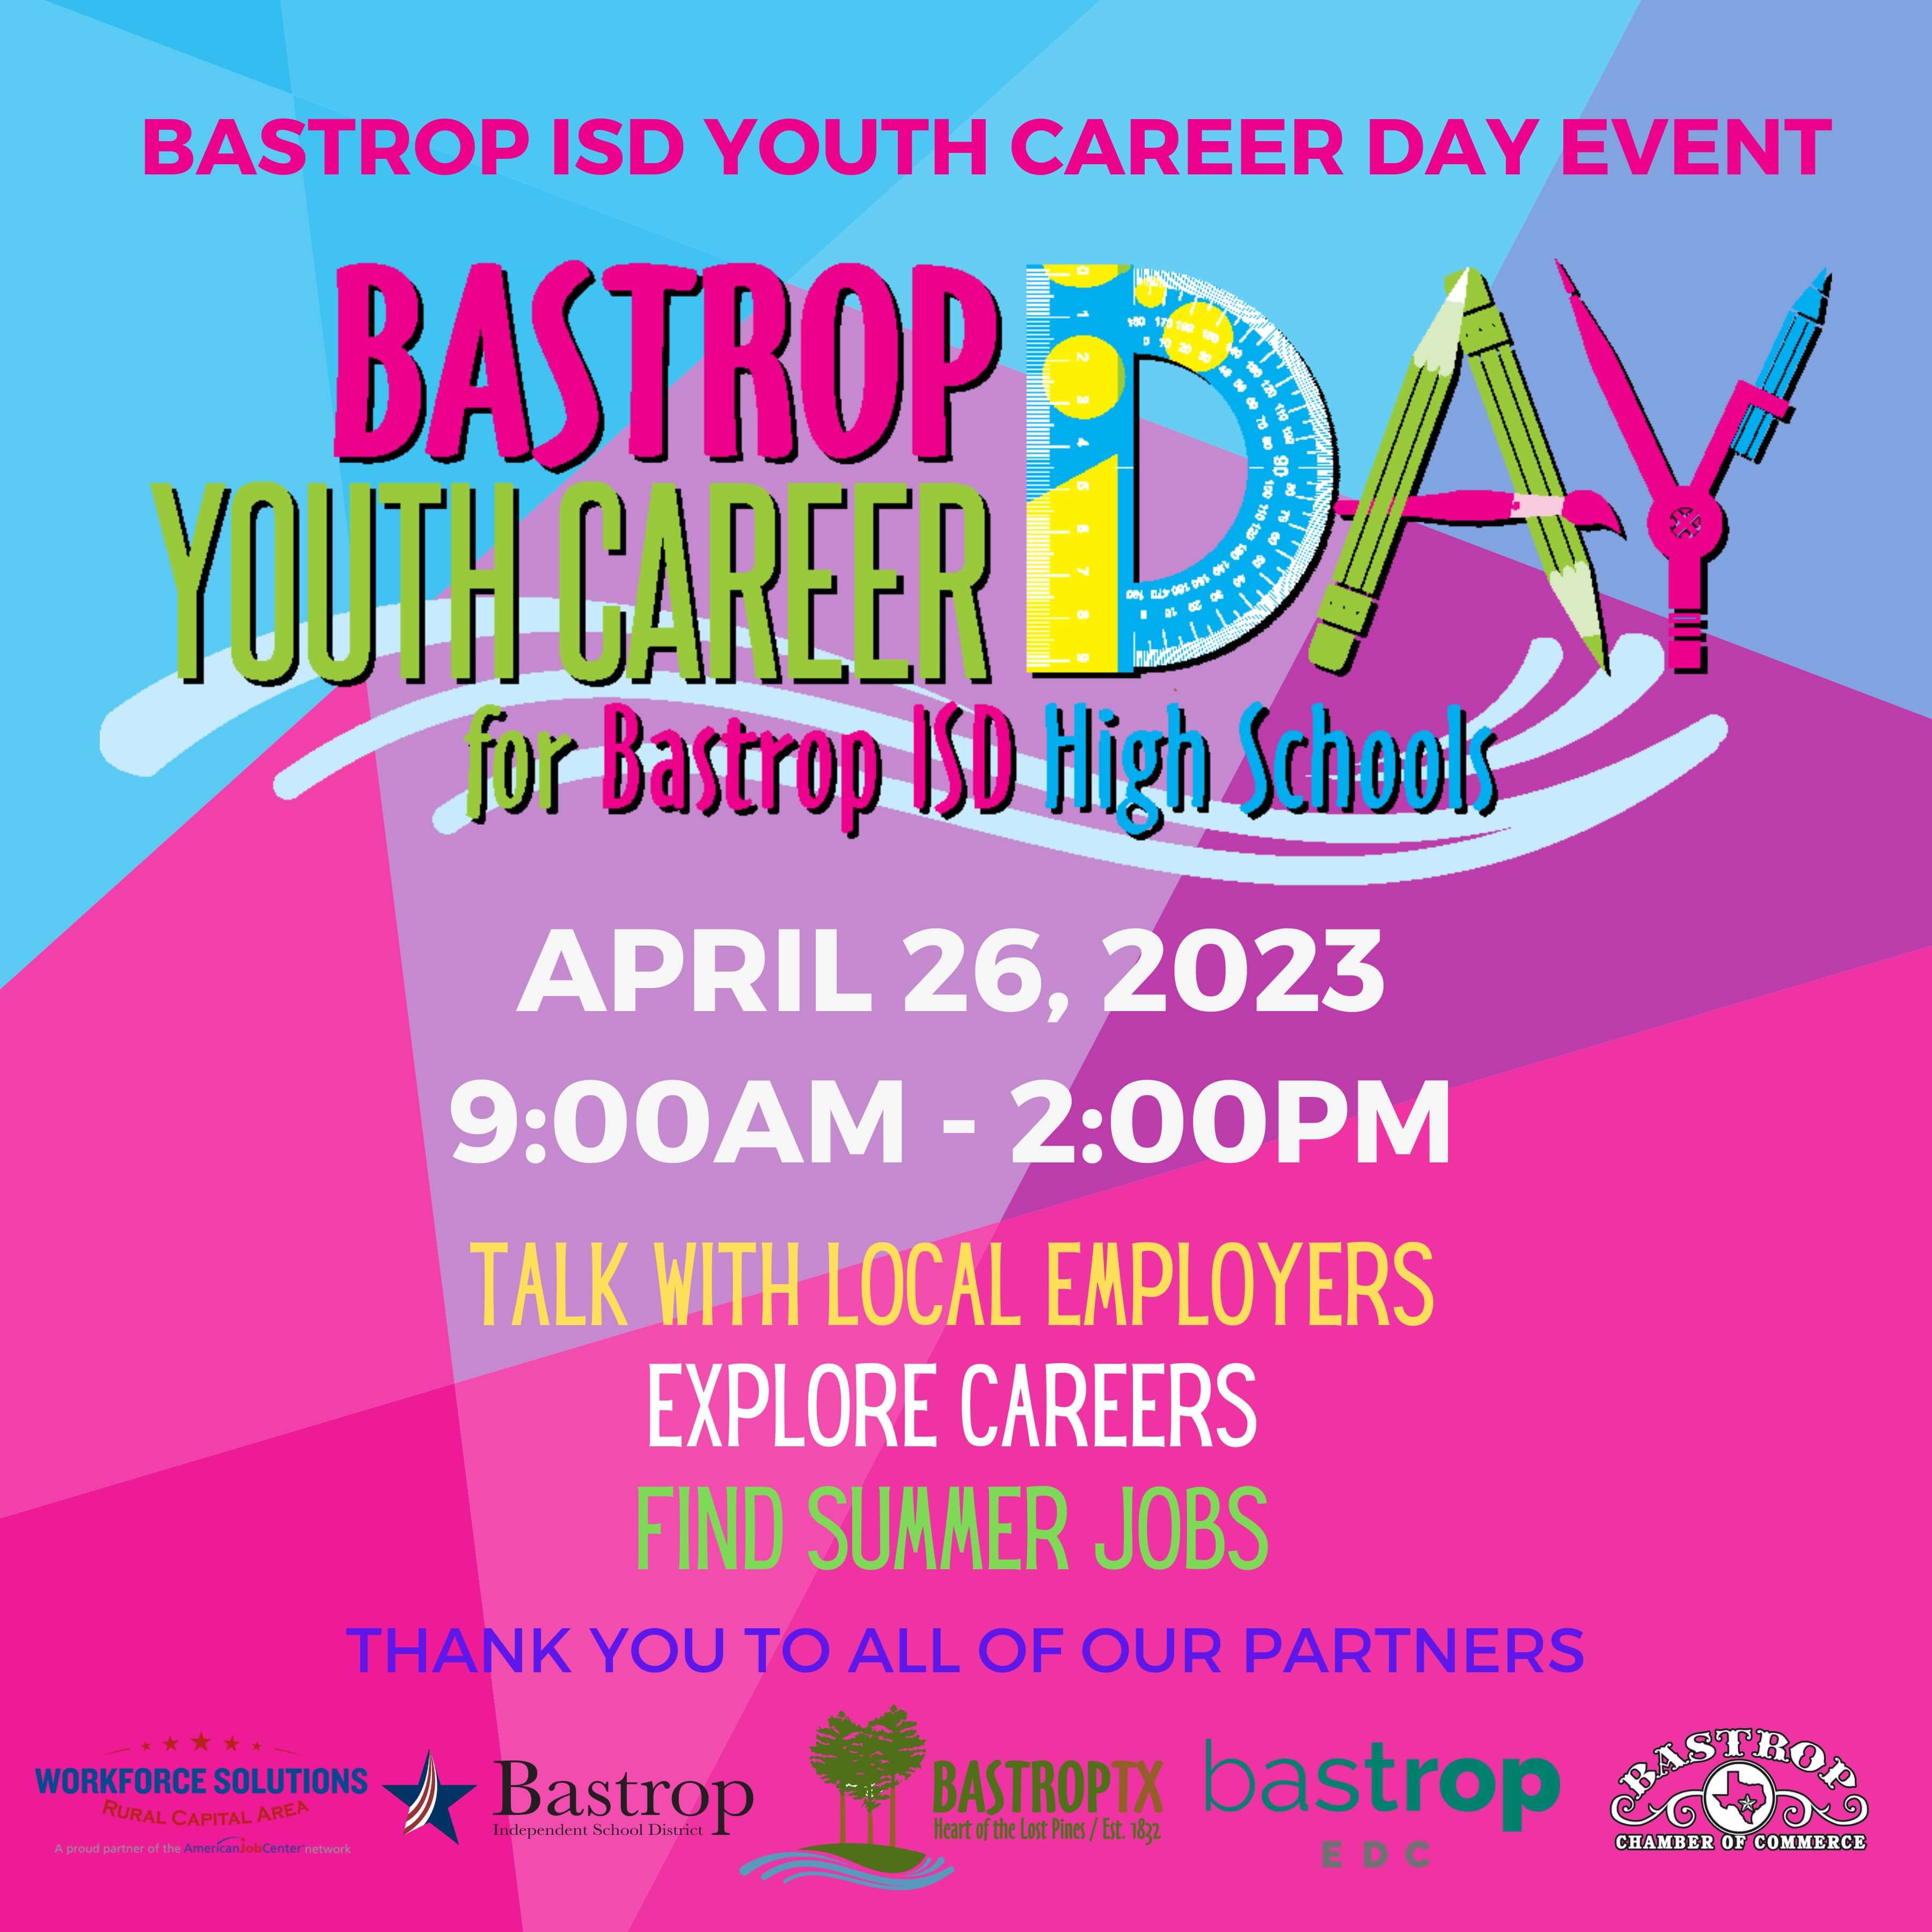 2023 Bastrop ISD YOUTH CAREER DAY EVENT